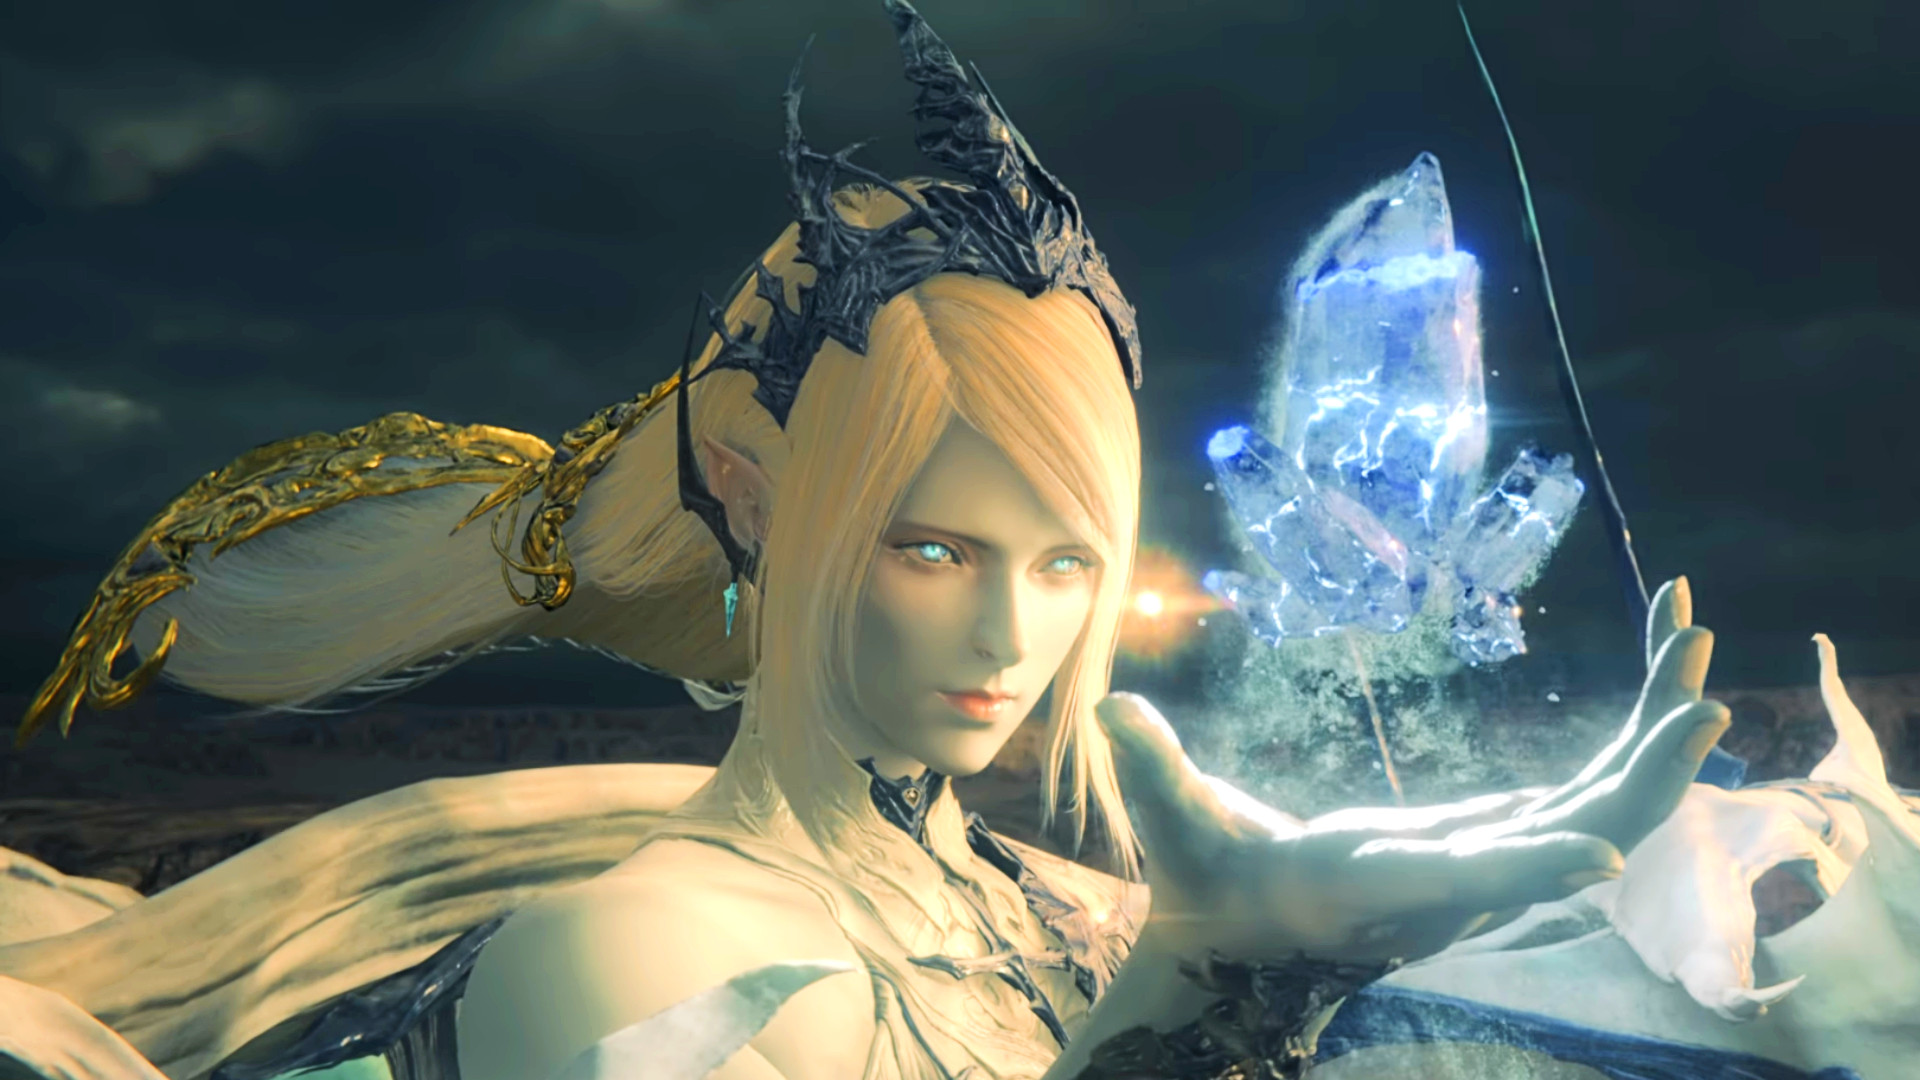 FF16 trailer could show off the next Final Fantasy game in October |  PCGamesN